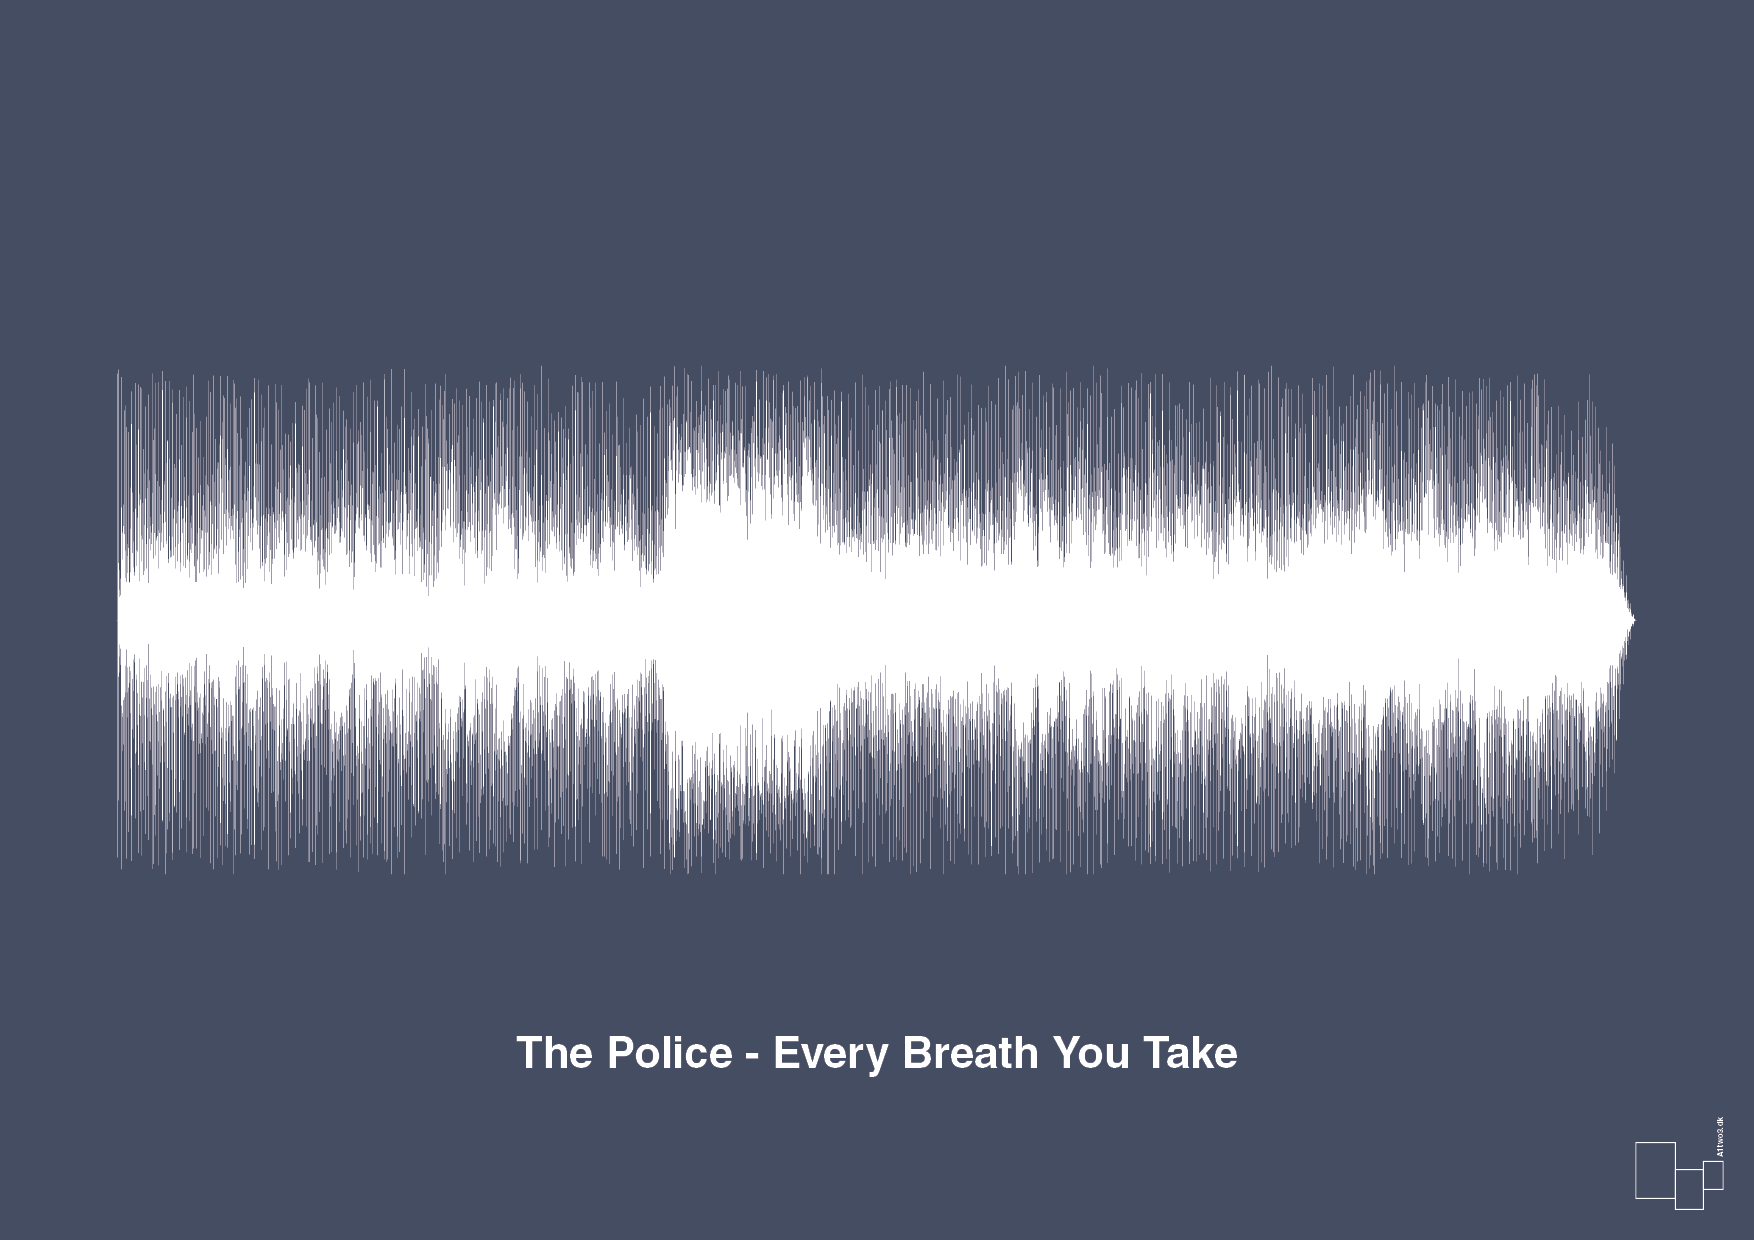 the police - every breath you take - Plakat med Musik i Petrol